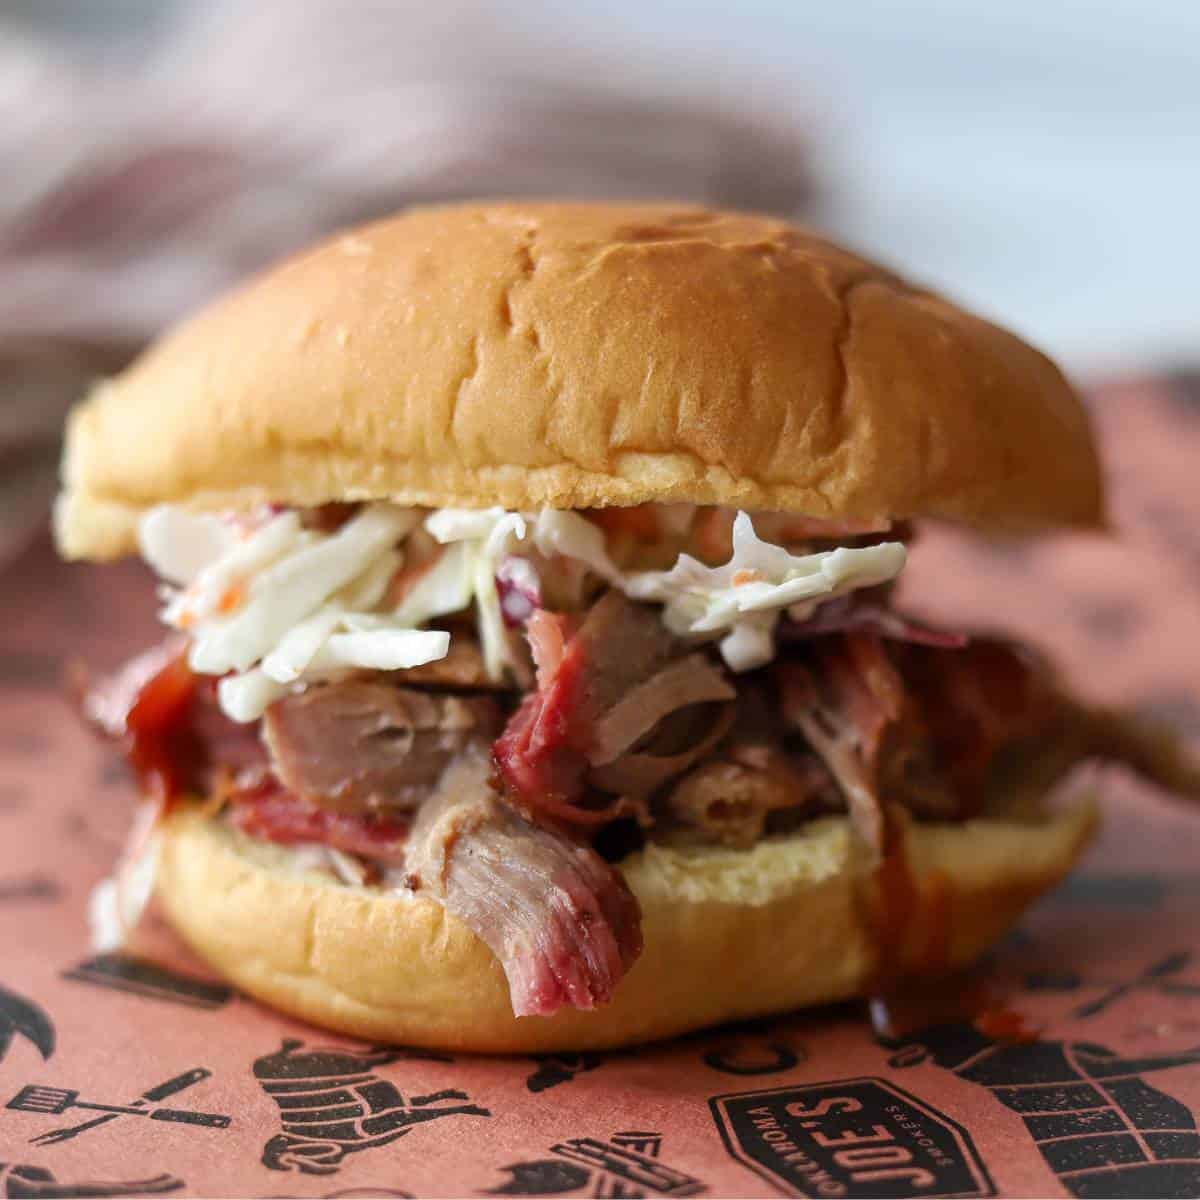 Pulled pork sandwich loaded with coleslaw.